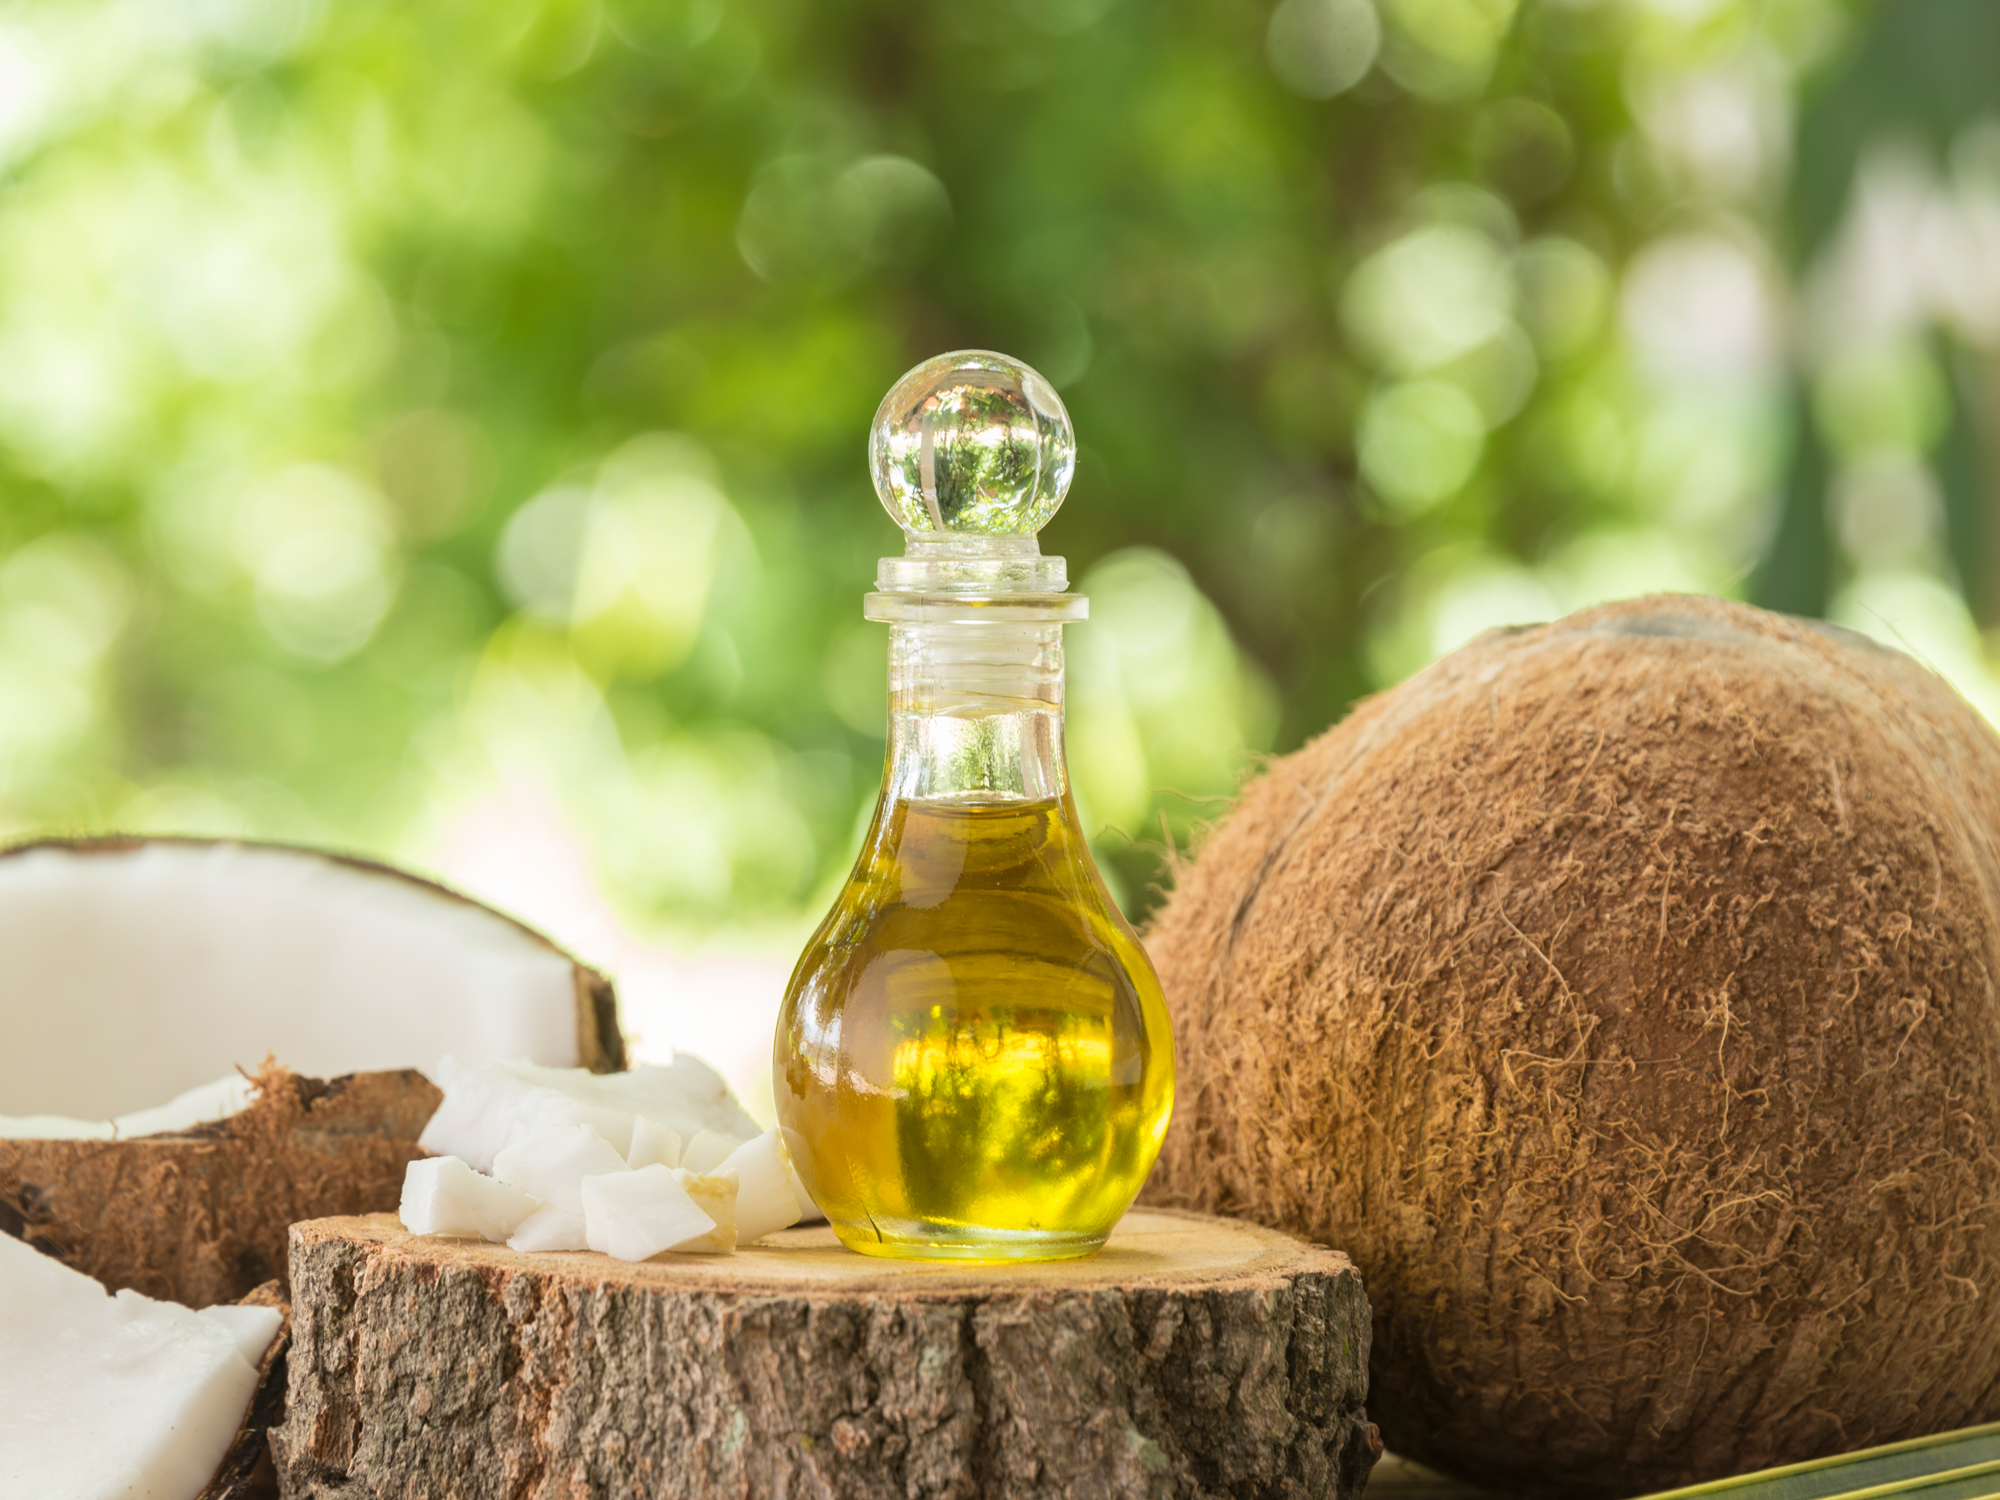 The metabolism-boosting, heart-protective oil